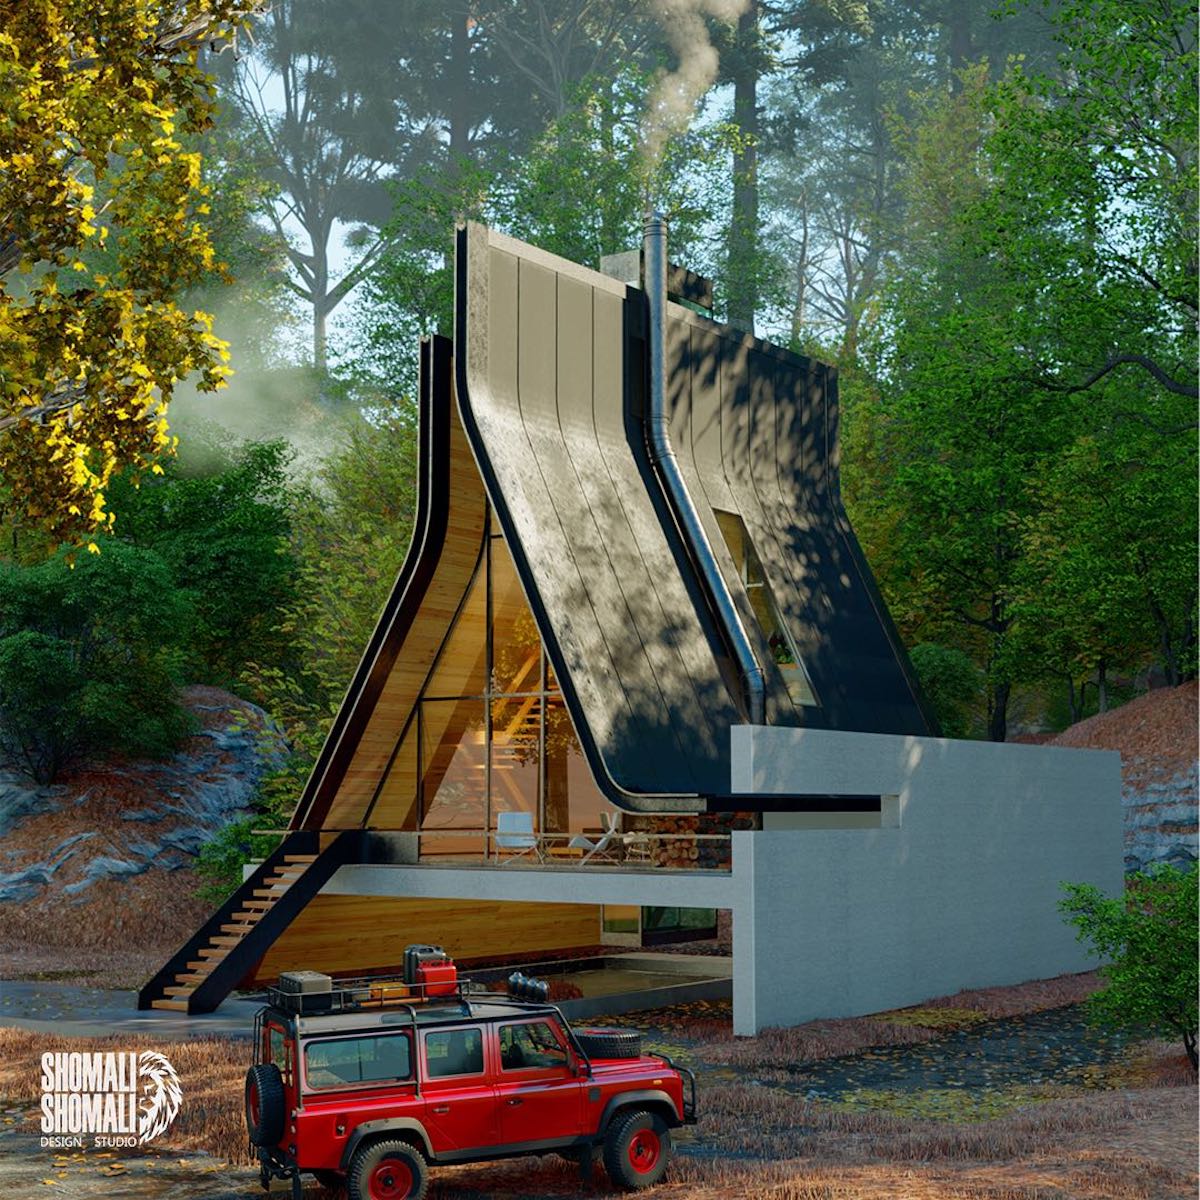 Architect Reimagines the Typical A-Frame Cabin